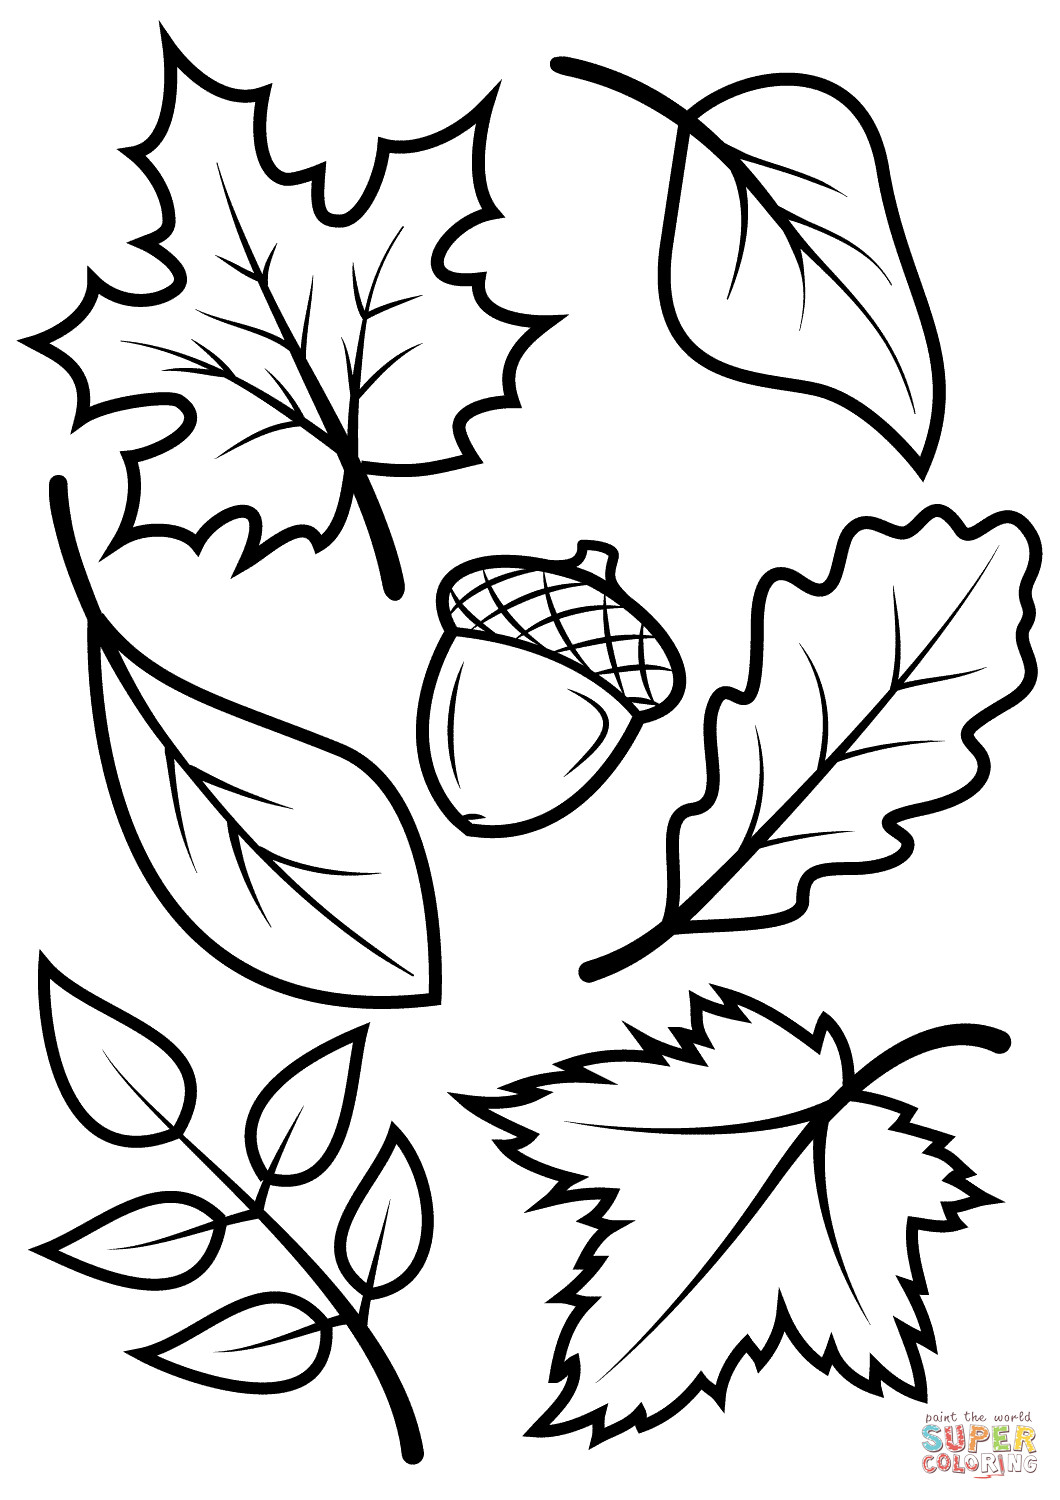 Printable Leaves Coloring Pages
 Fall Leaves and Acorn coloring page